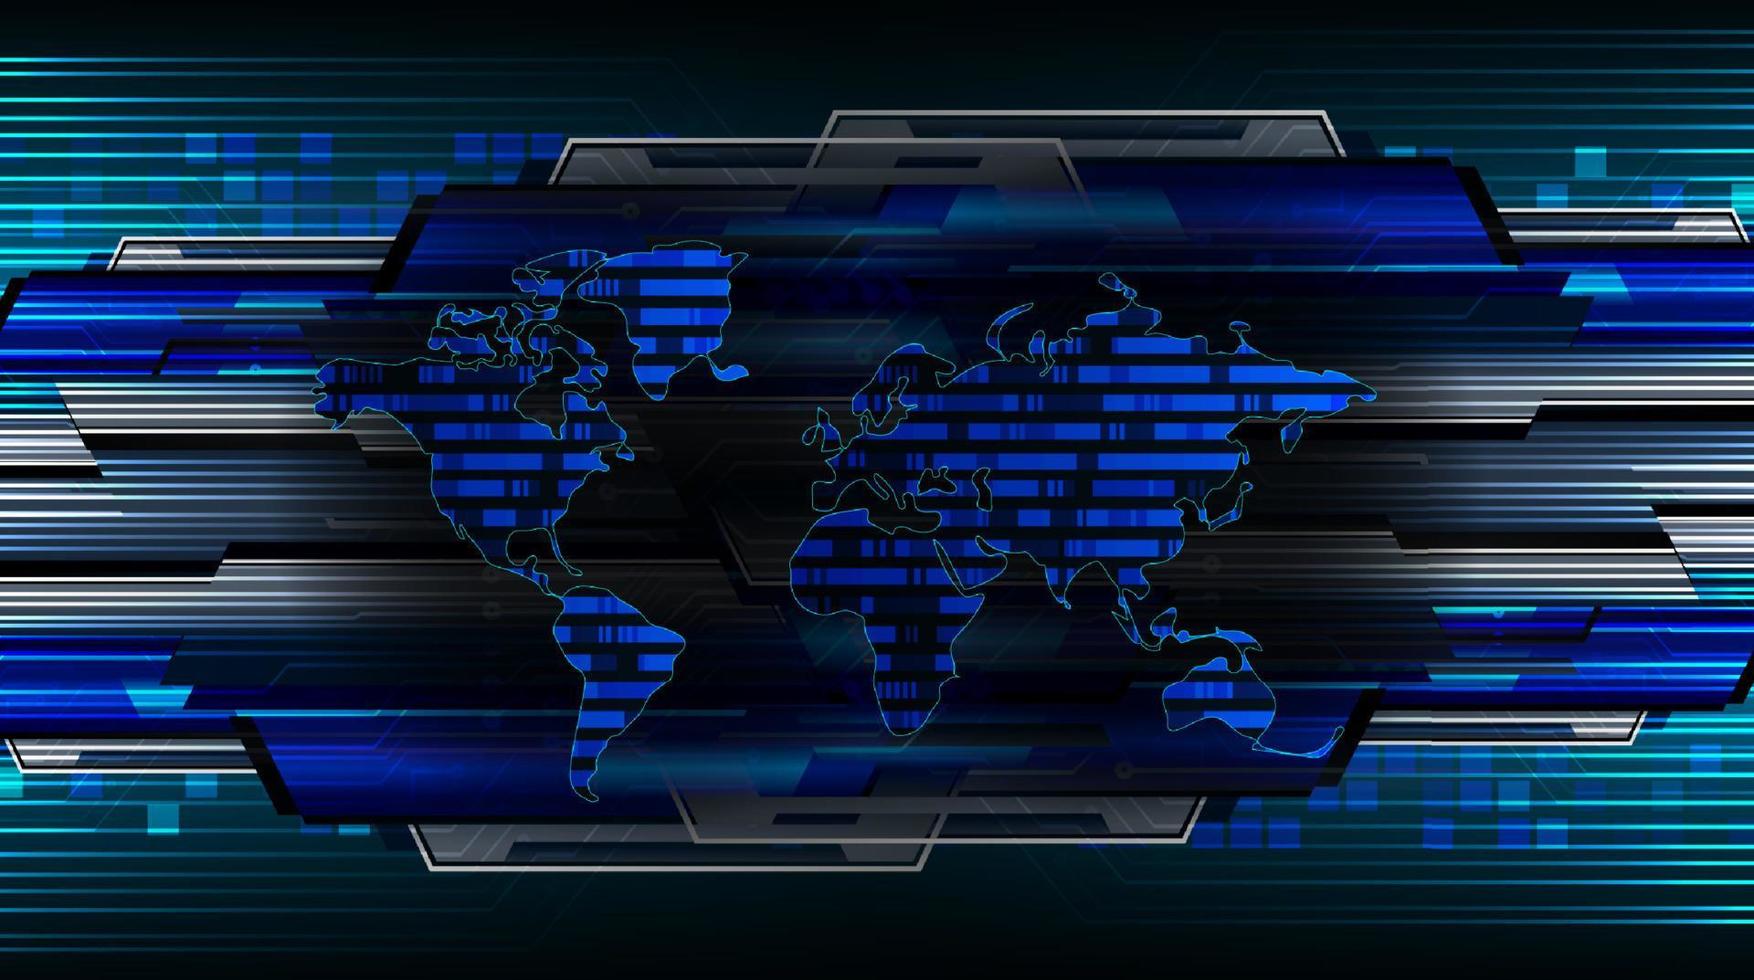 Modern Holographic World Map on Technology Background vector